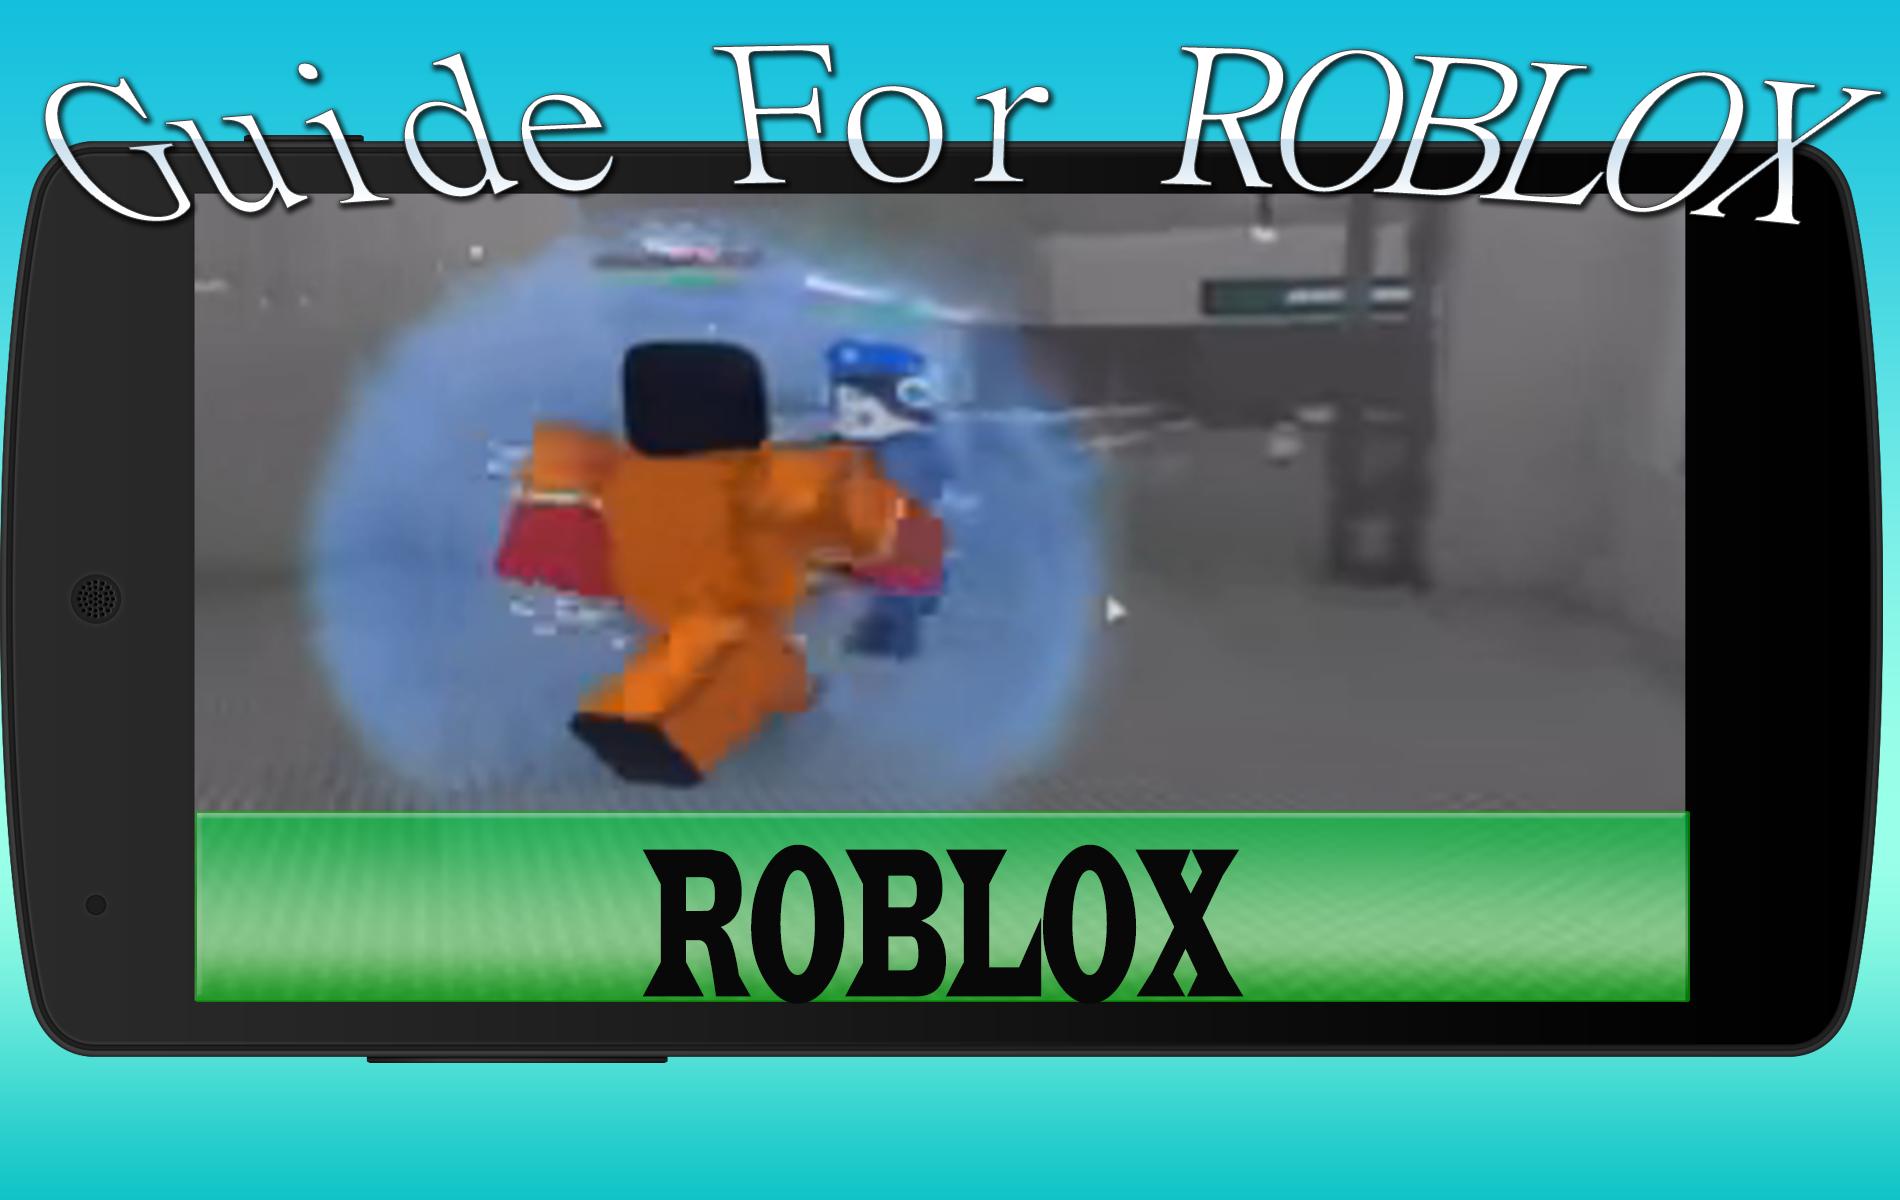 Guide For Roblox Free For Android Apk Download - guide for roblox apk app free download for android